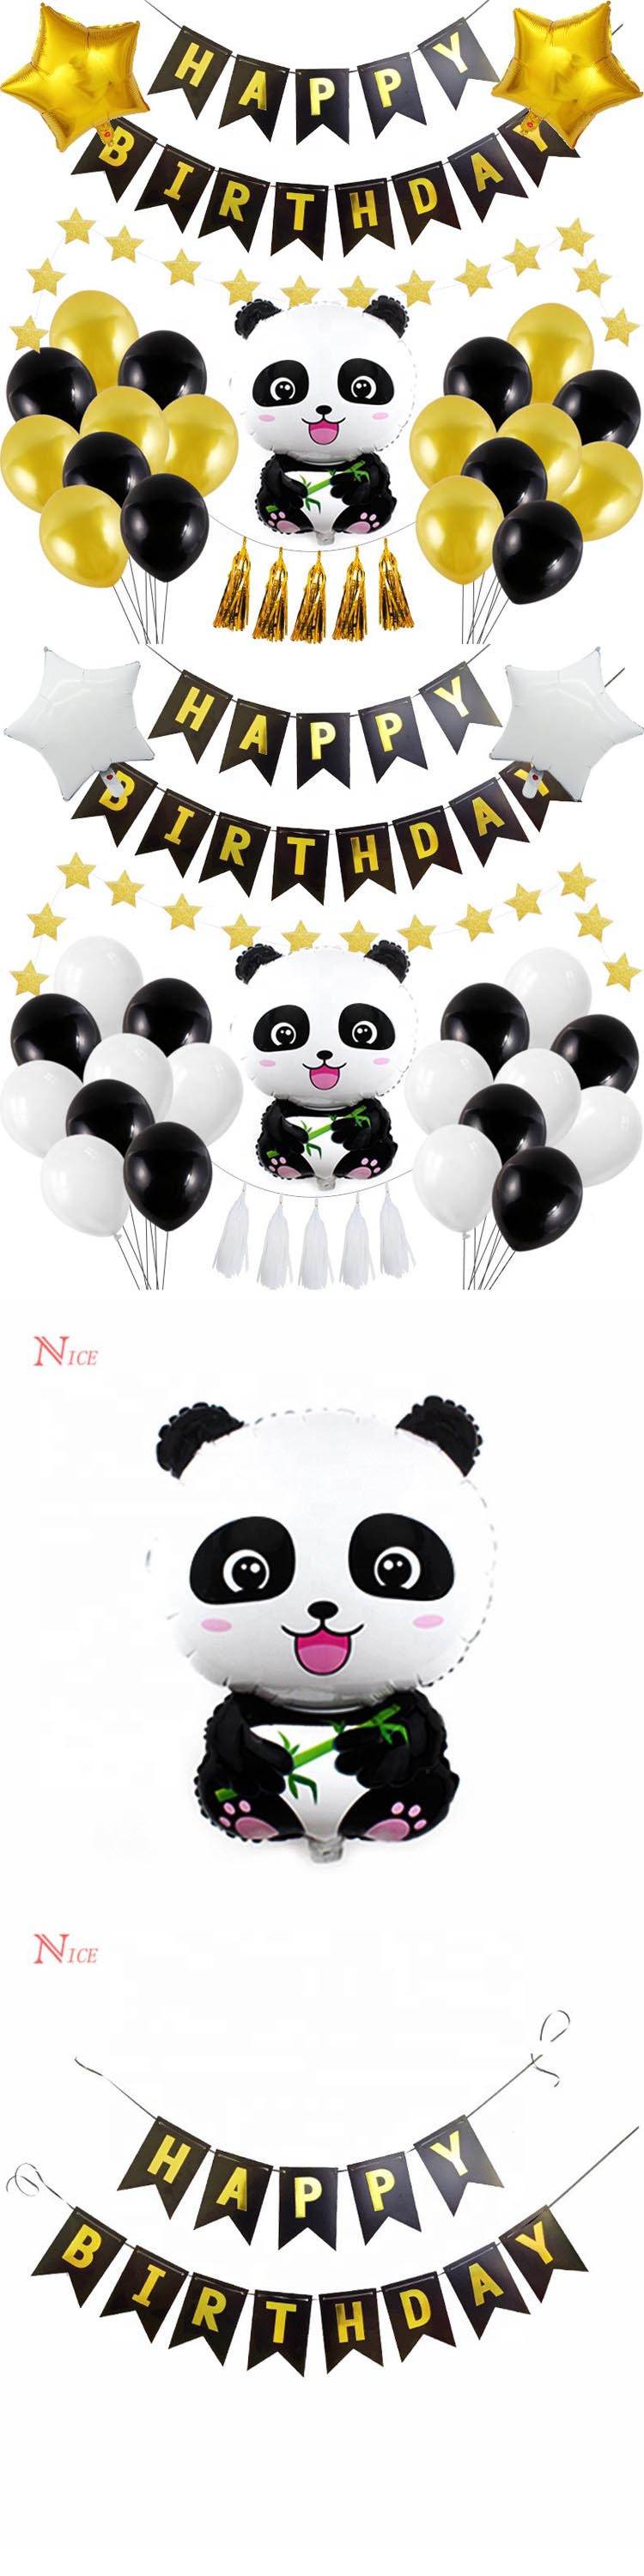 Nice Giant Panda Theme Birthday Party Decorations supplies Black White Balloons with Happy Birthday Banner Foil Panda se